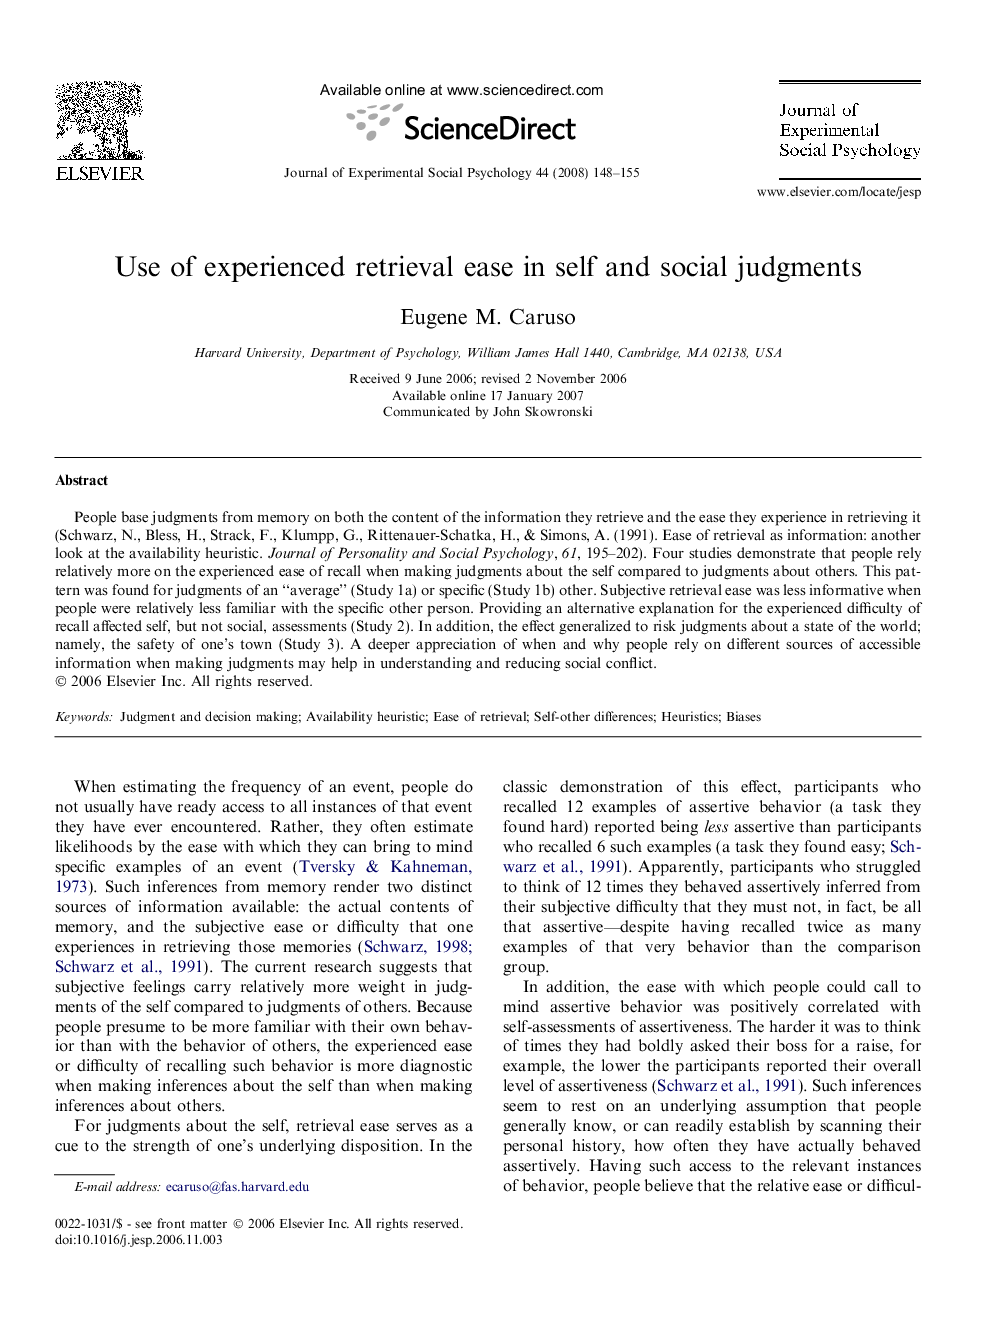 Use of experienced retrieval ease in self and social judgments